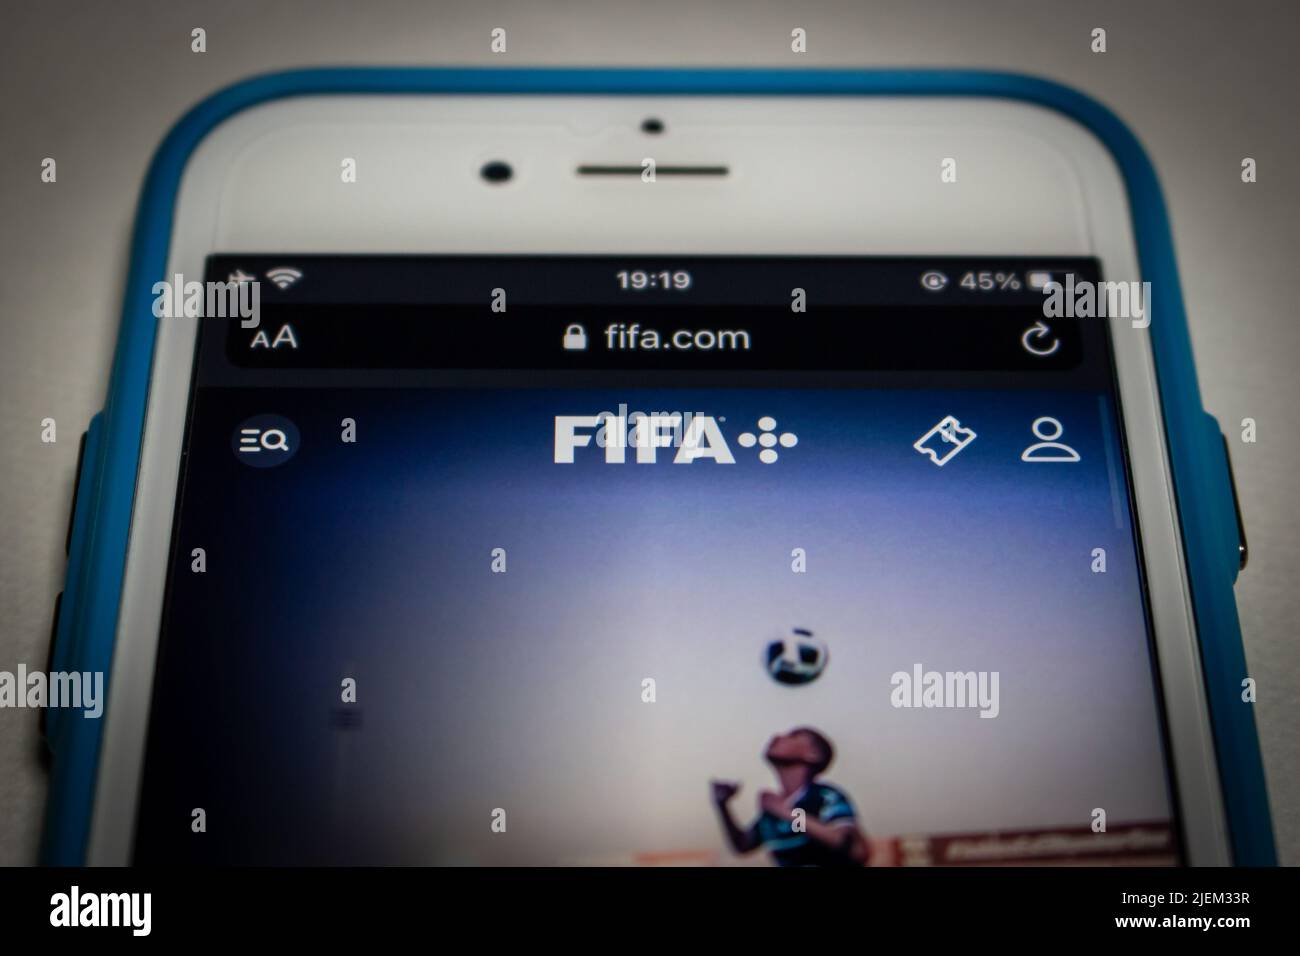 Kumamoto, JAPAN - May 11 2022 : The logo of FIFA+ (FIFA Plus), the video streaming service from FIFA, on its website on an iPhone in a dark mood. Stock Photo